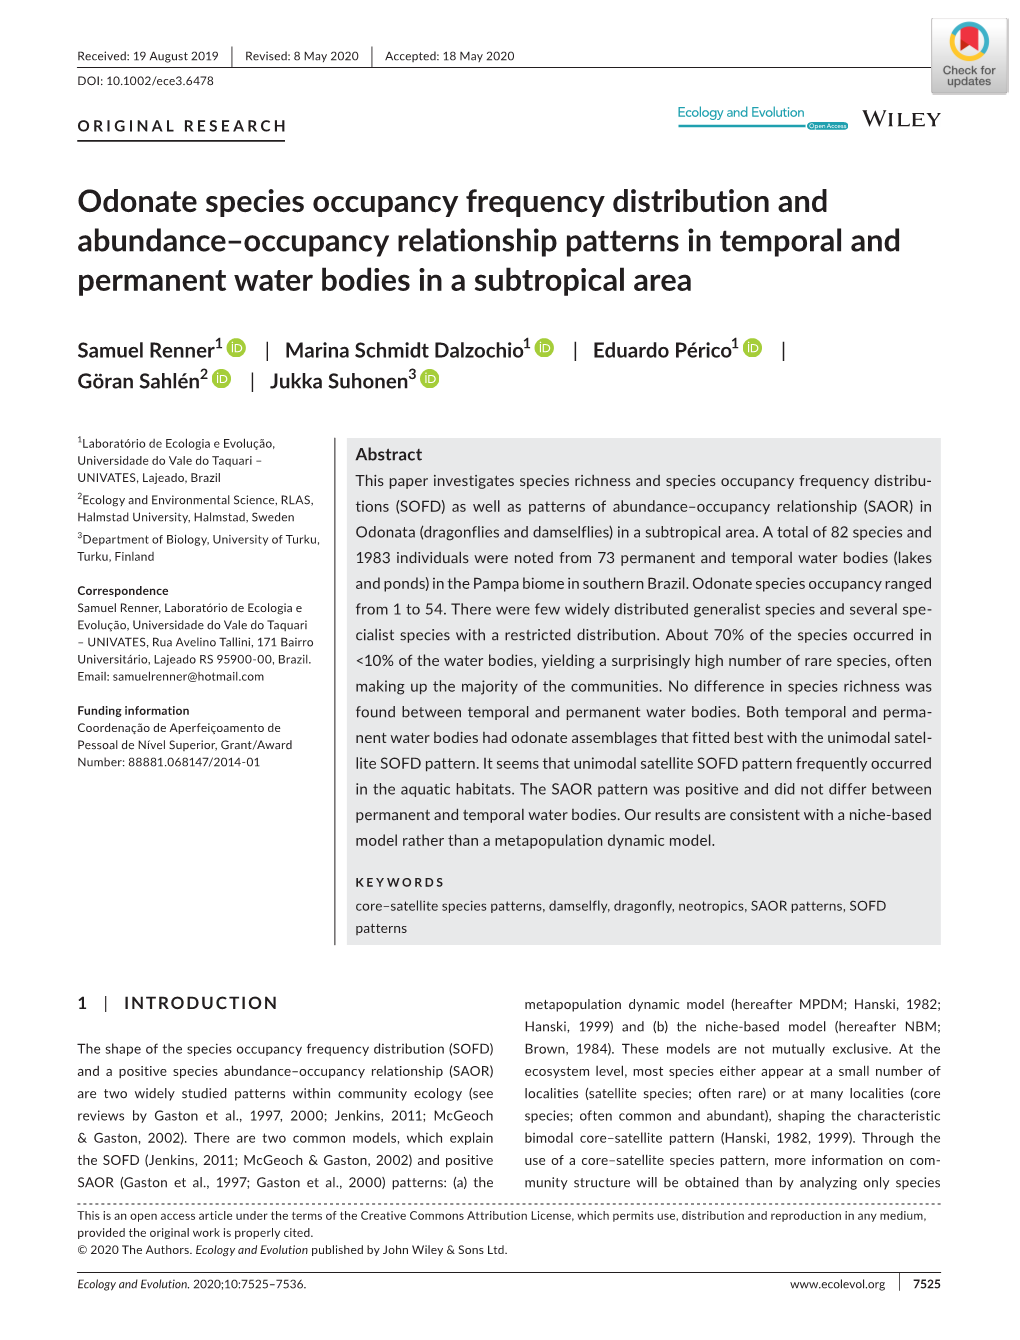 Odonate Species Occupancy Frequency Distribution and Abundance–Occupancy Relationship Patterns in Temporal and Permanent Water Bodies in a Subtropical Area